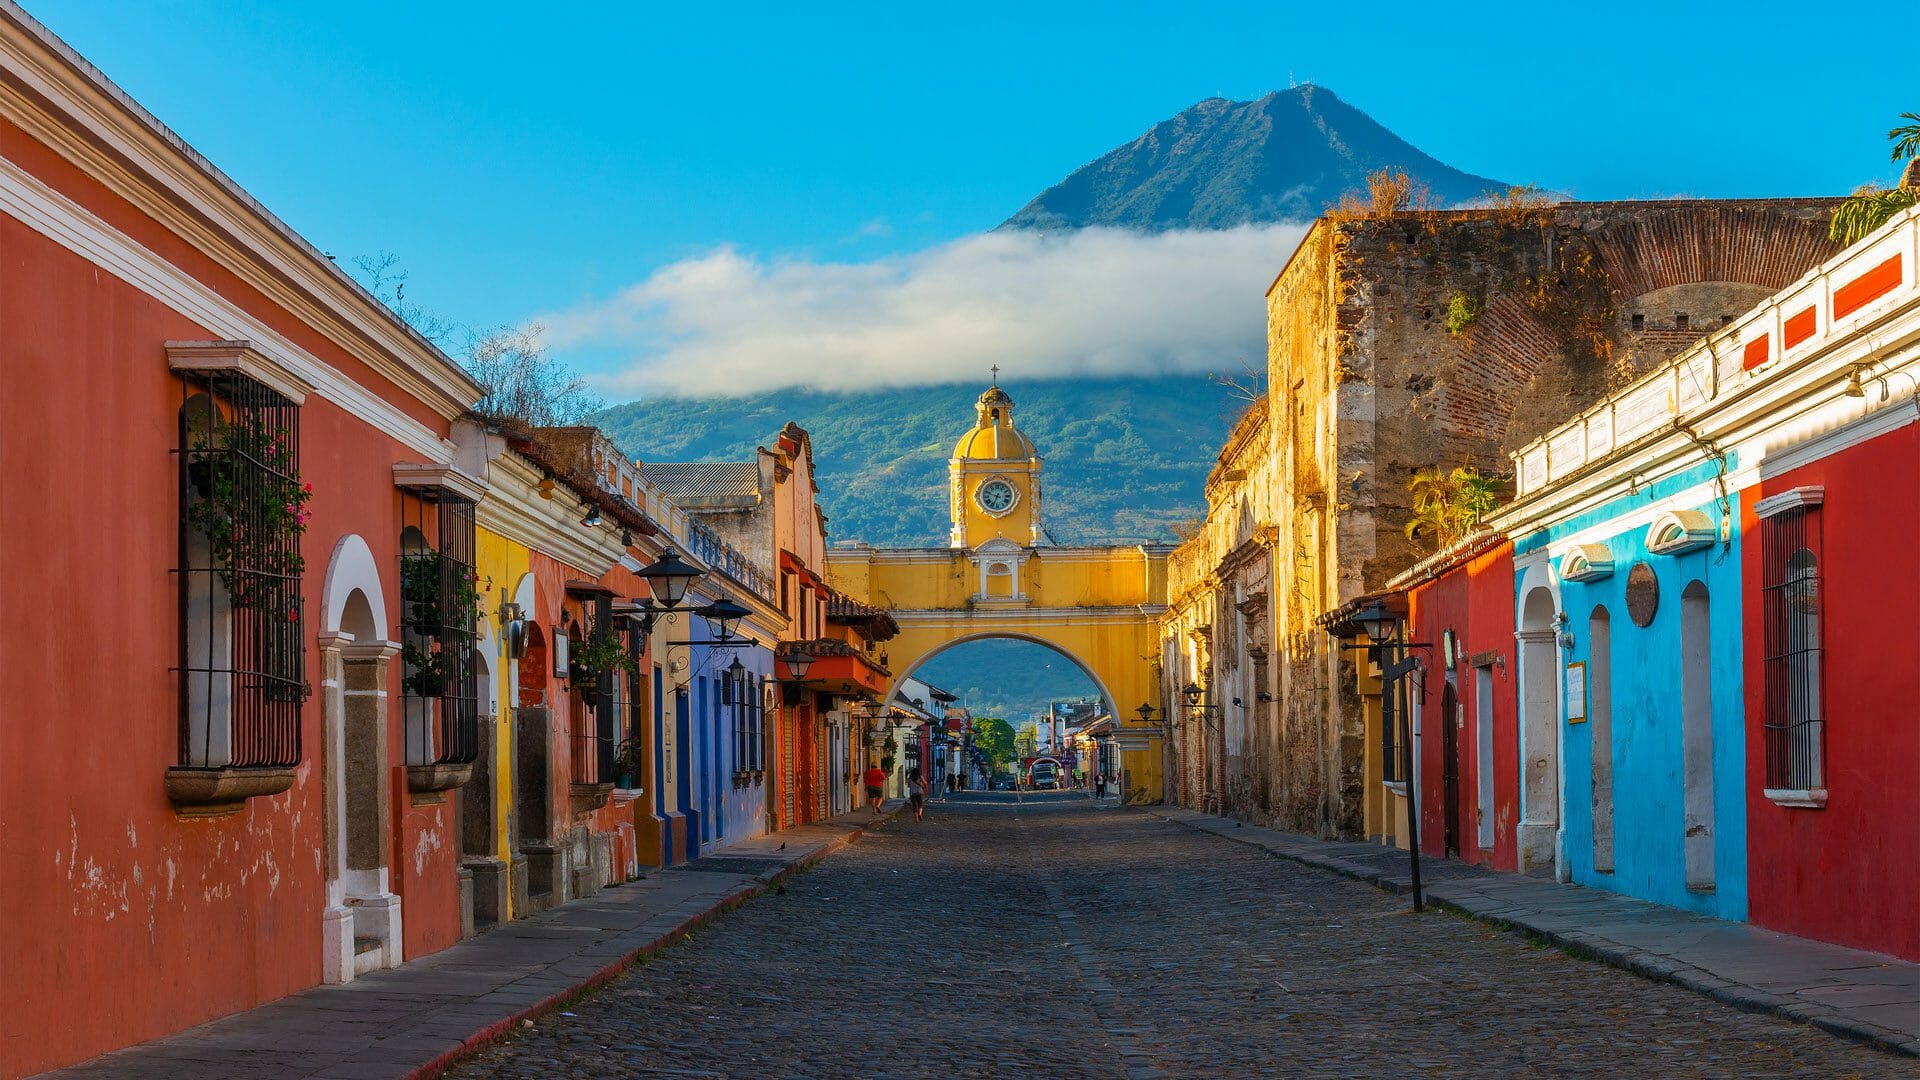 Antigua holidays - Discover Guatemala with Steppes Travel